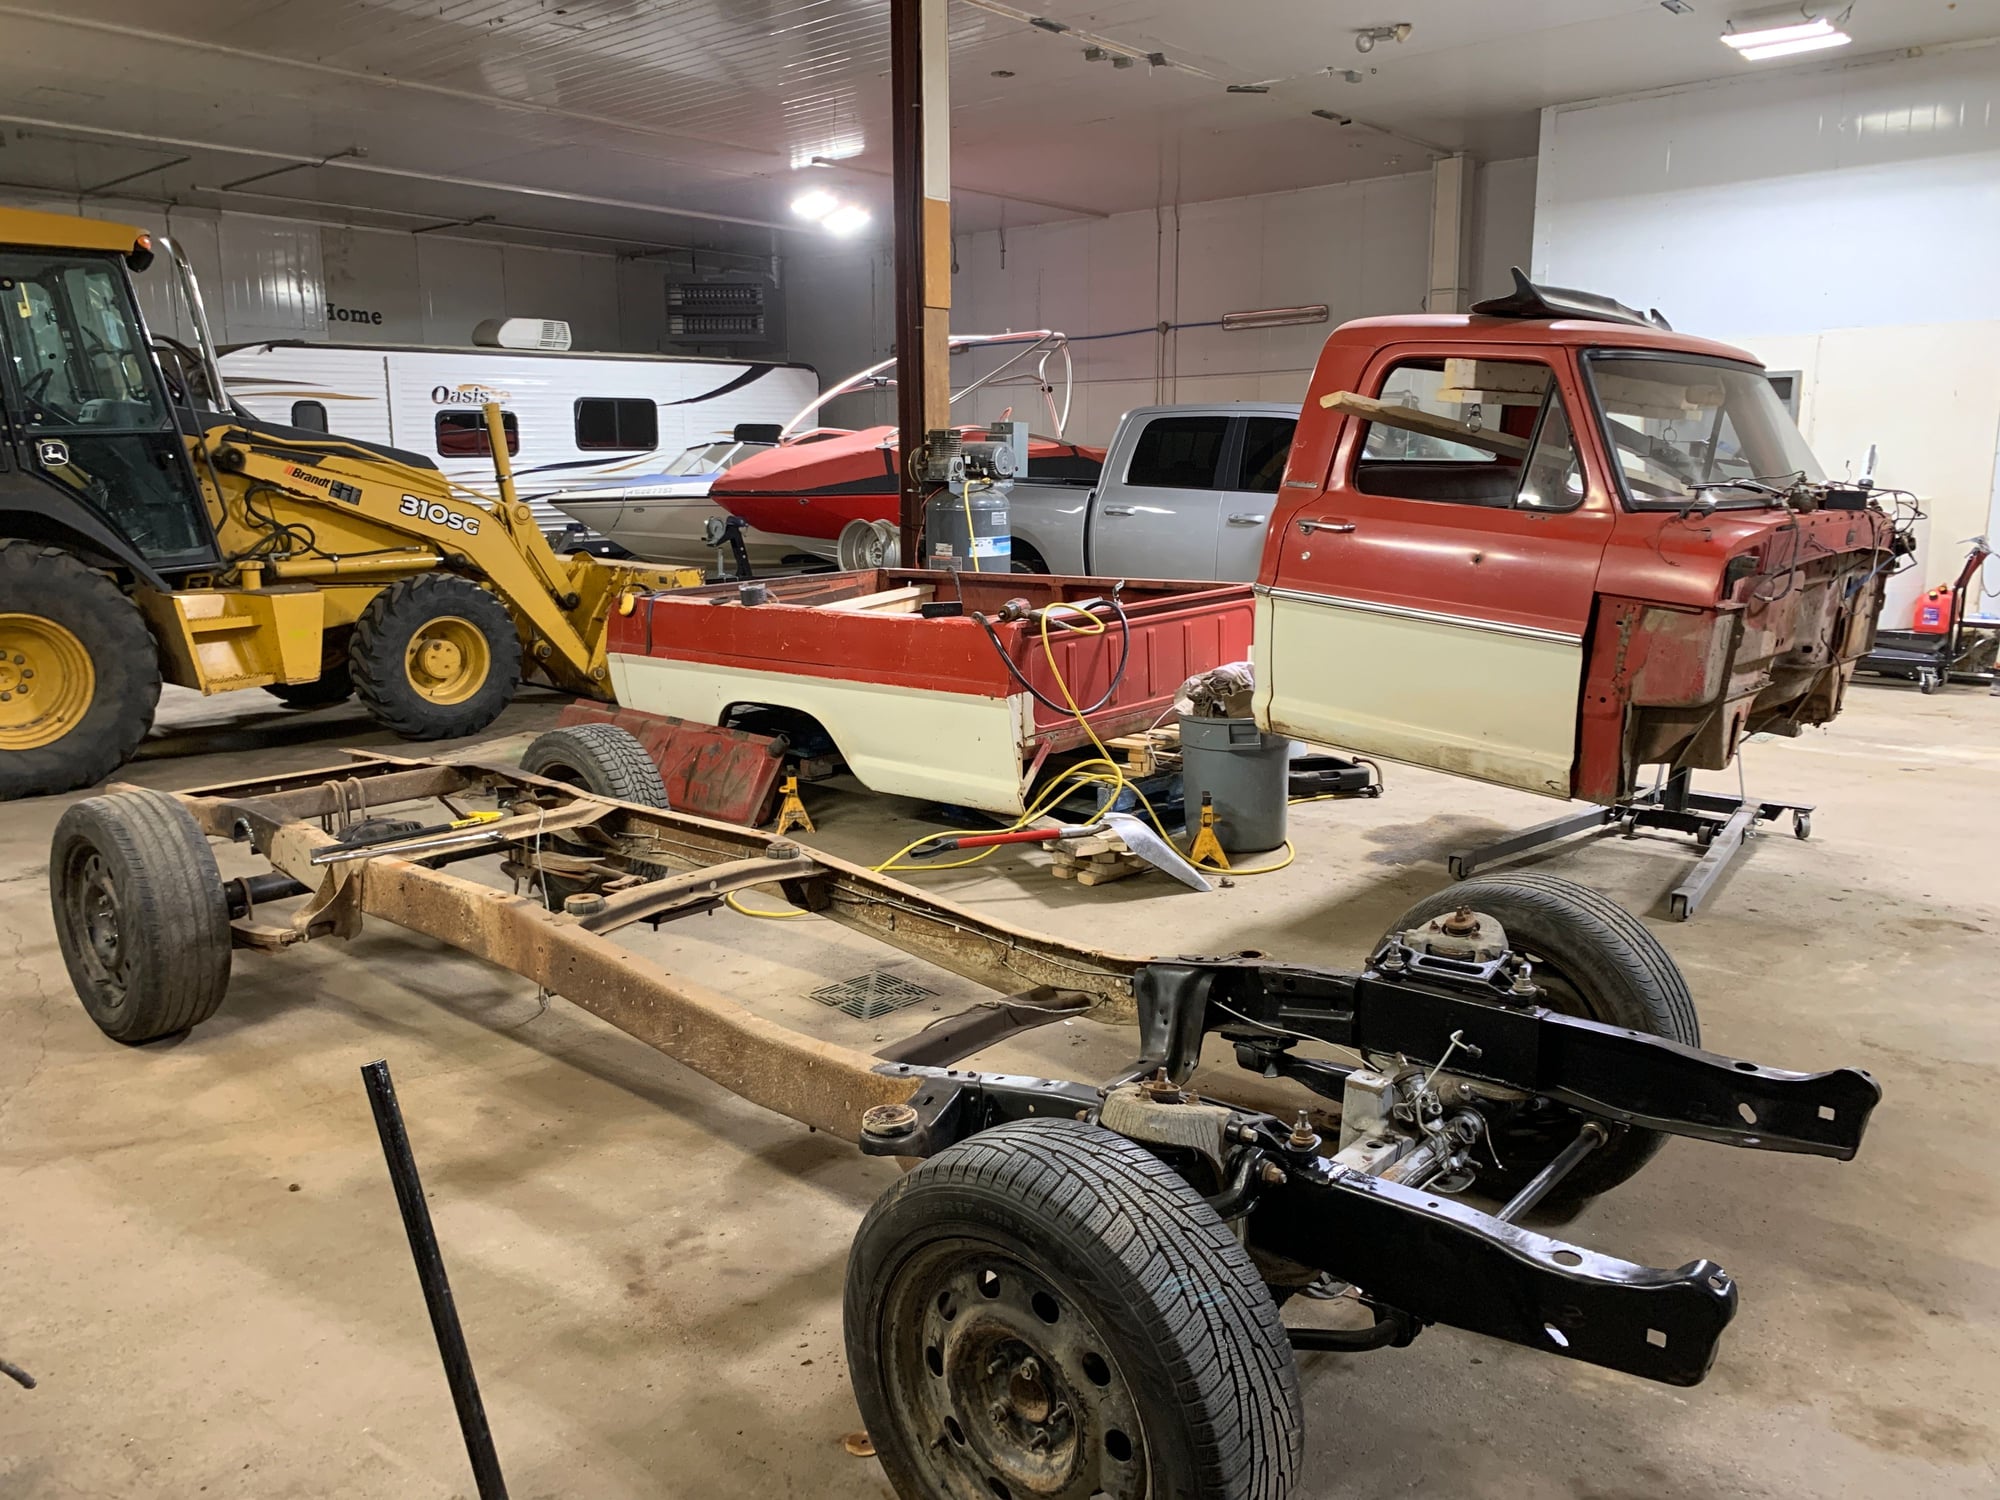 67 F100 Crown Vic Swap Project.